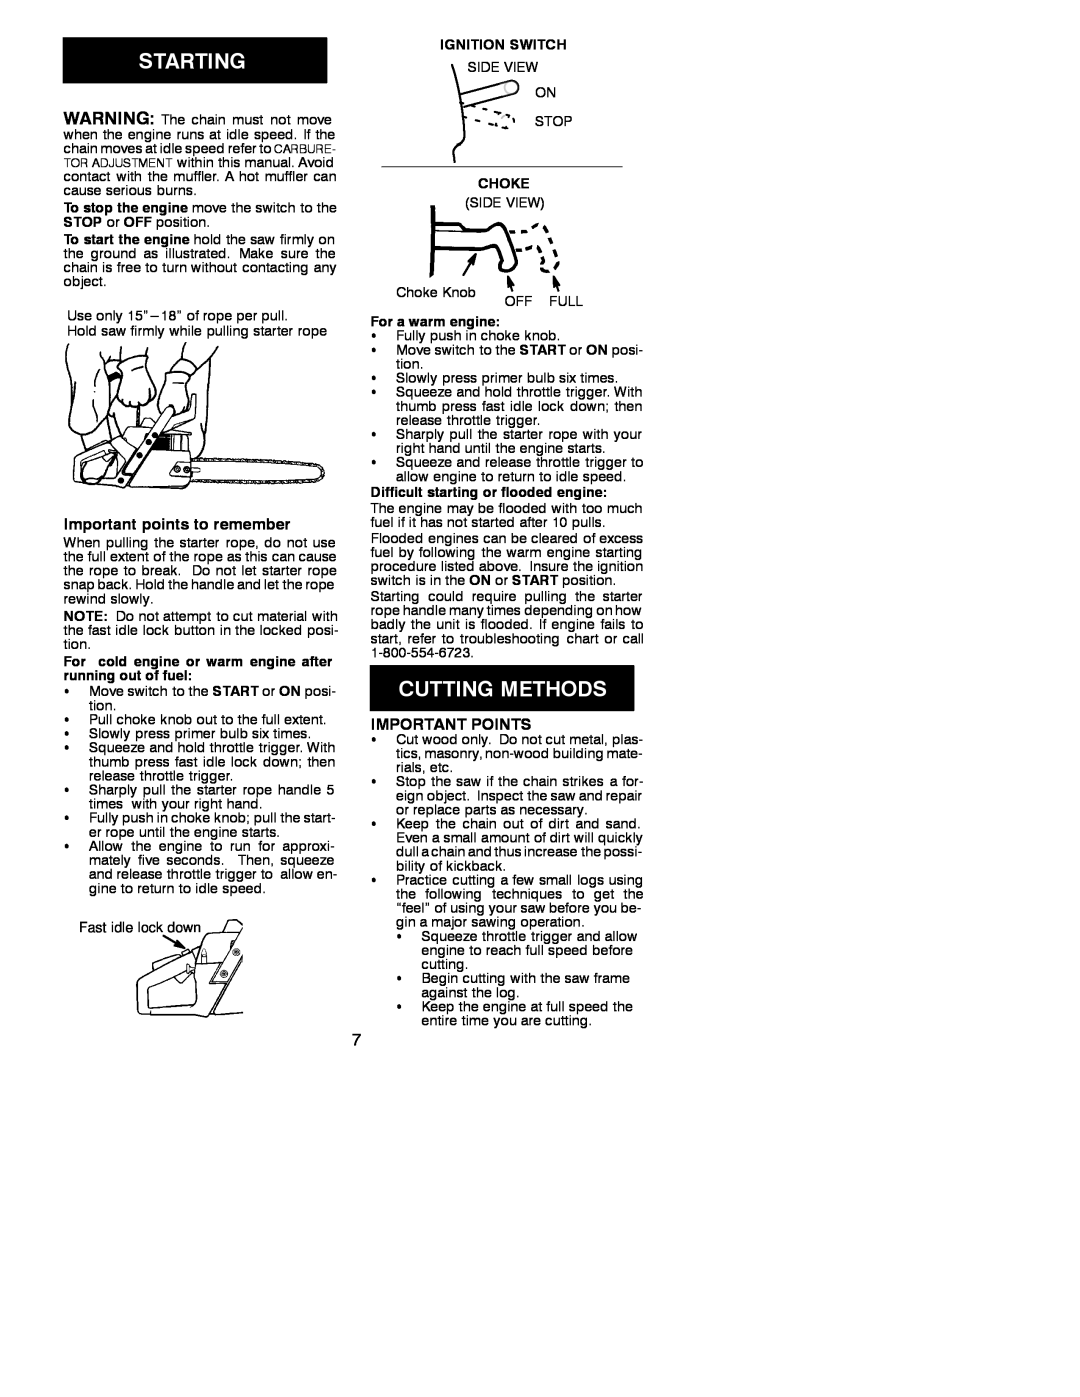 Poulan 530087857 manual Important points to remember, Important Points, Ignition Switch, Choke 